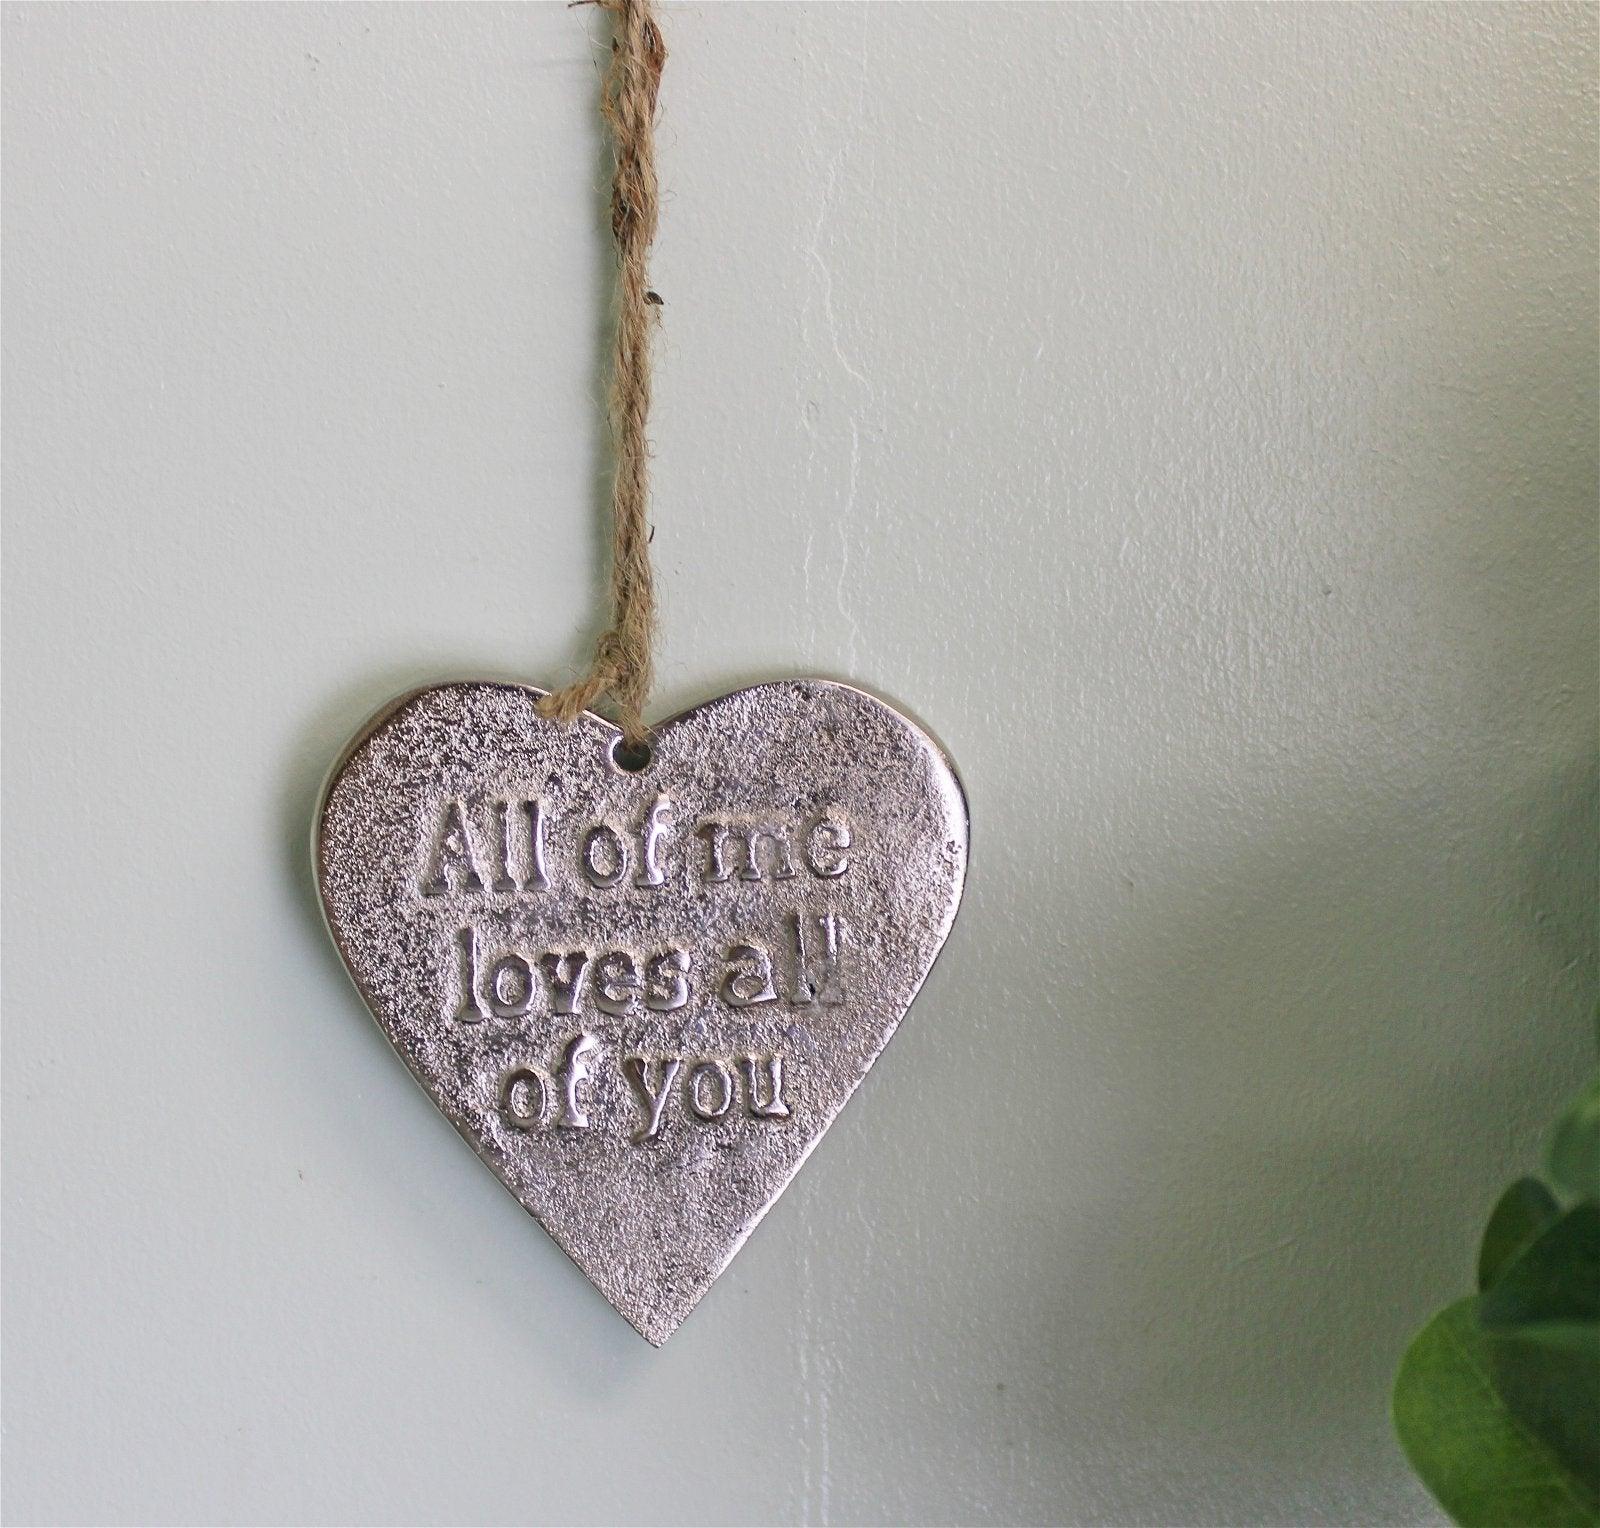 View Small Hanging Silver Heart with Love Quote information